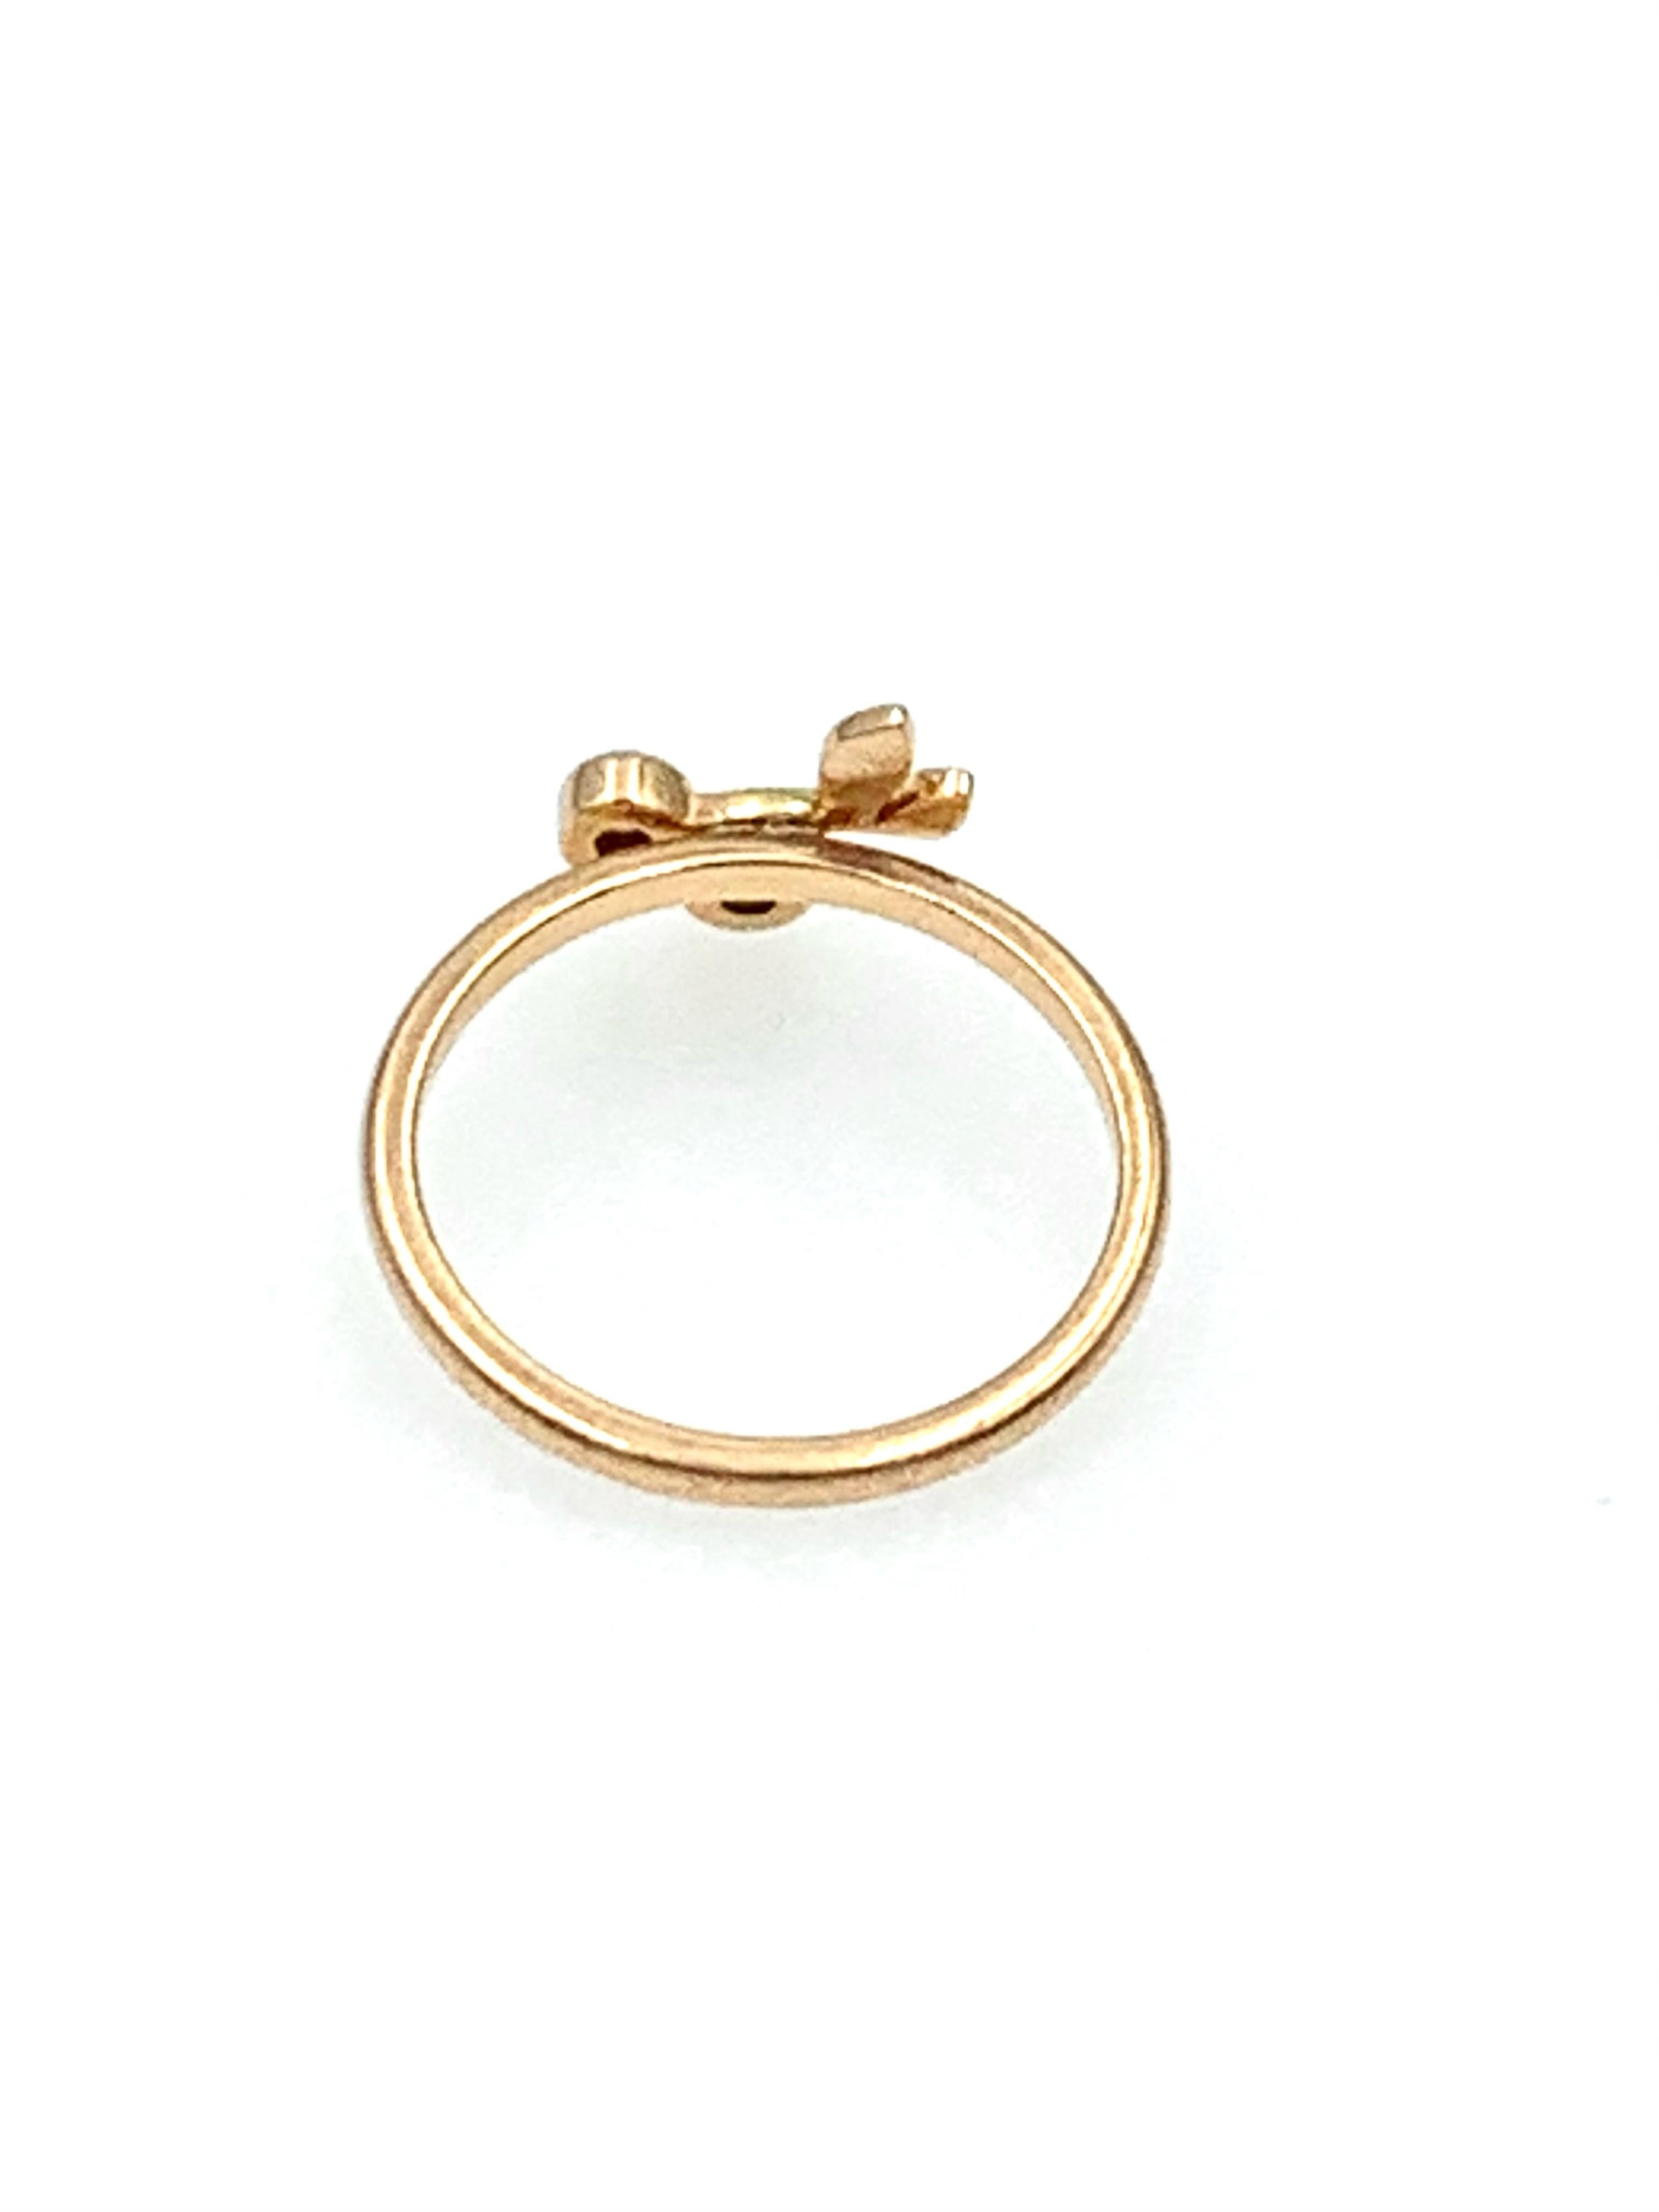 Hand made in 9 karat Rose gold this dainty little ring has 2 Diamonds making up the Cherries which weight at approximately .10 carats all together. This is part of our Princess Collection, they made to order and are bespoke to our customers